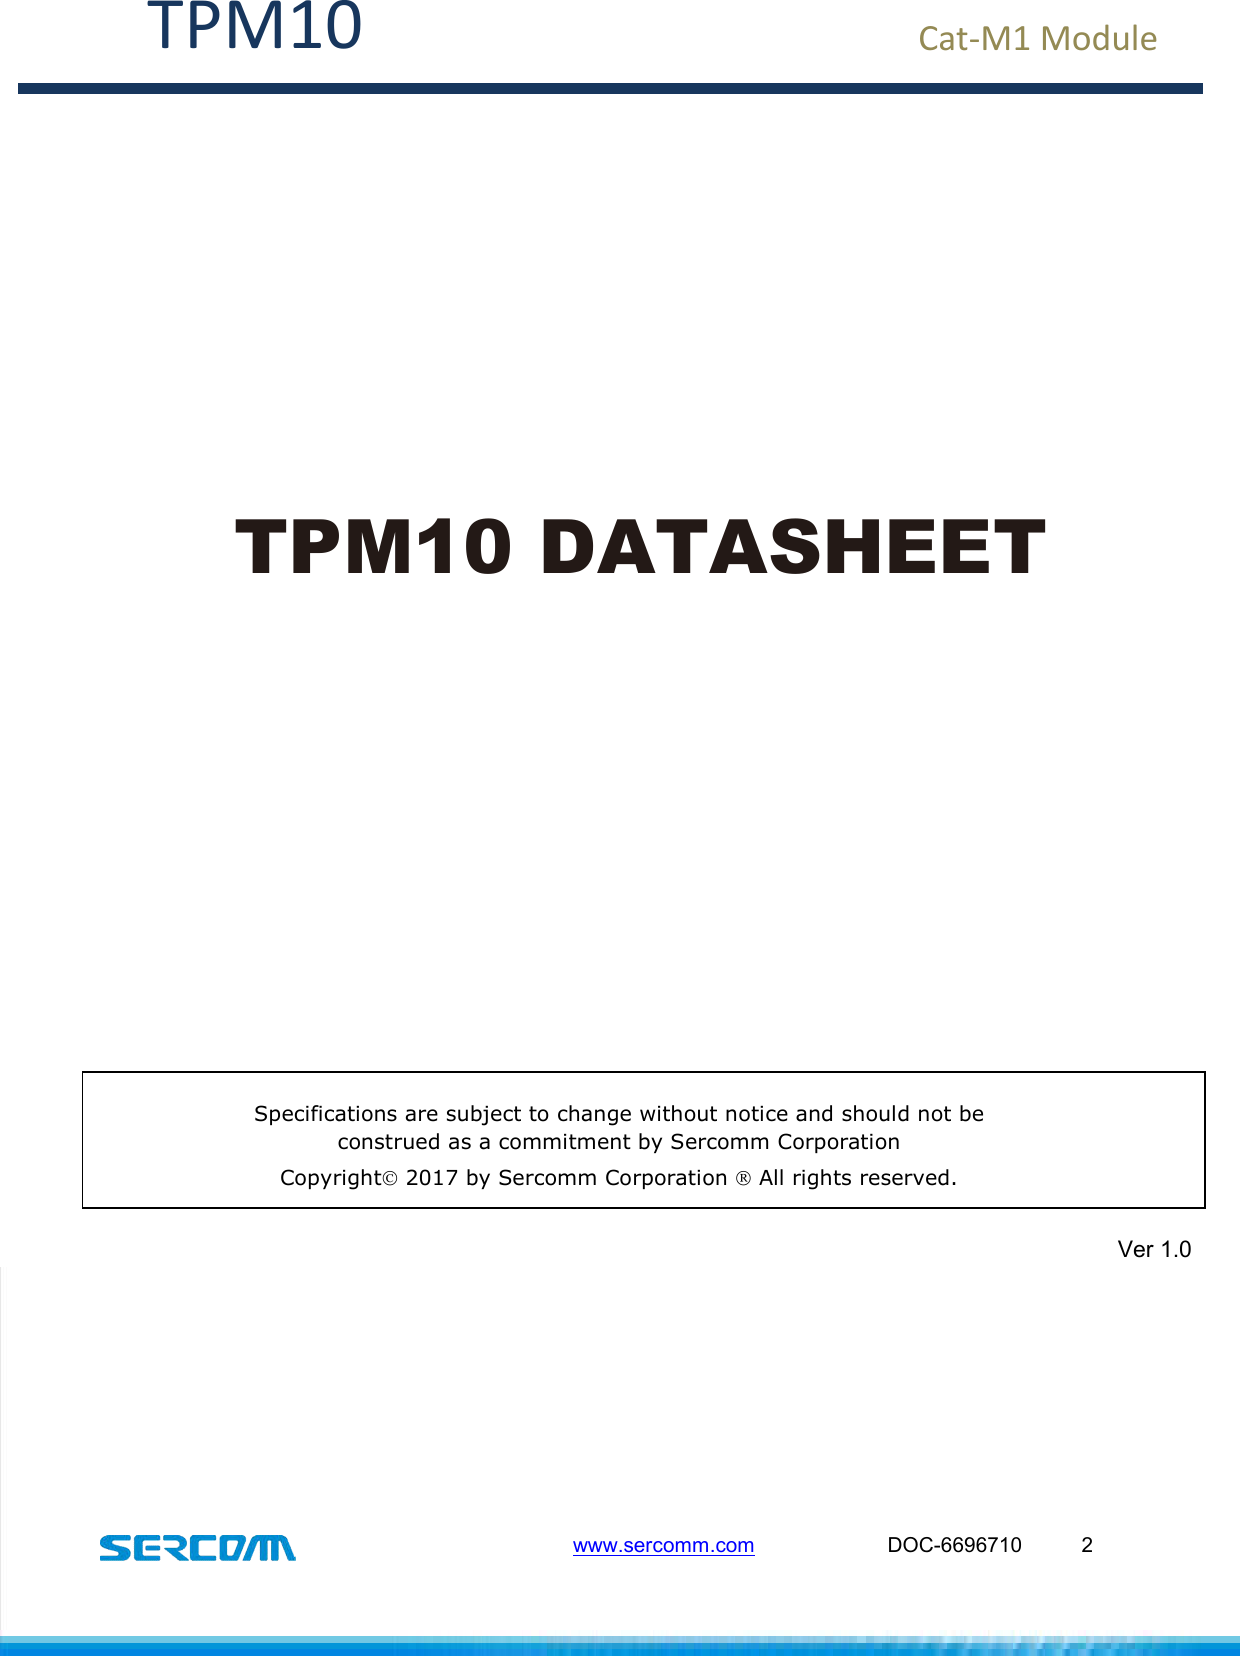  TPM10                                                   www.sercomm.com                       DOC-6696710  2  Cat-M1 Module    TPM10 DATASHEET       Specifications are subject to change without notice and should not be construed as a commitment by Sercomm Corporation  Copyright 2017 by Sercomm Corporation  All rights reserved.  Ver 1.0 